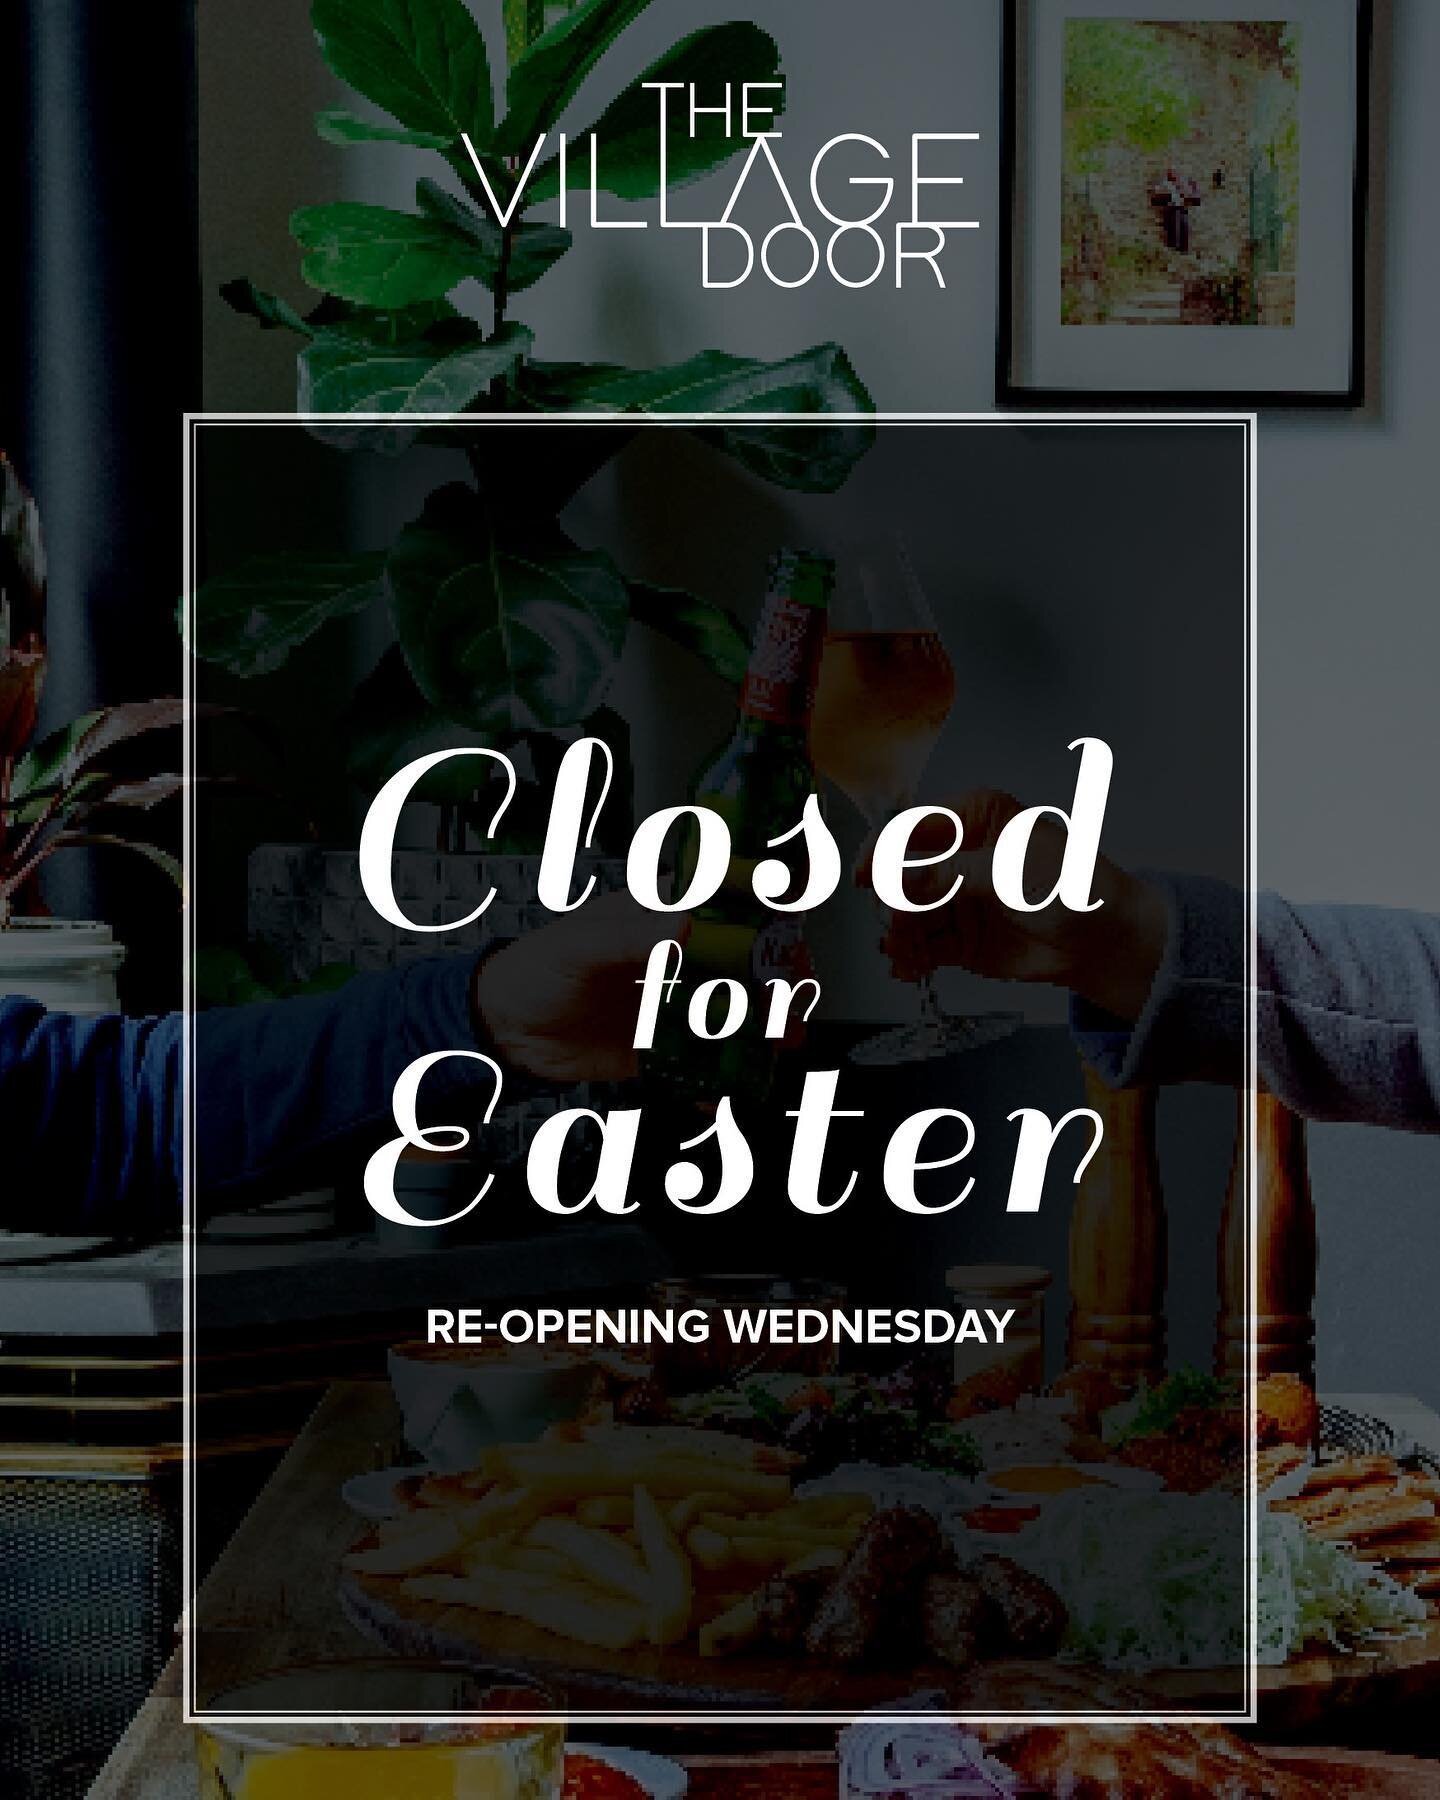 🐣 Hi all! We&rsquo;re taking a break and will be closed from Good Friday. We&rsquo;ll be back open on Wednesday April 7th. We hope everyone has a safe and happy Easter! #thevillagedoor #thevillagedoorgeelong